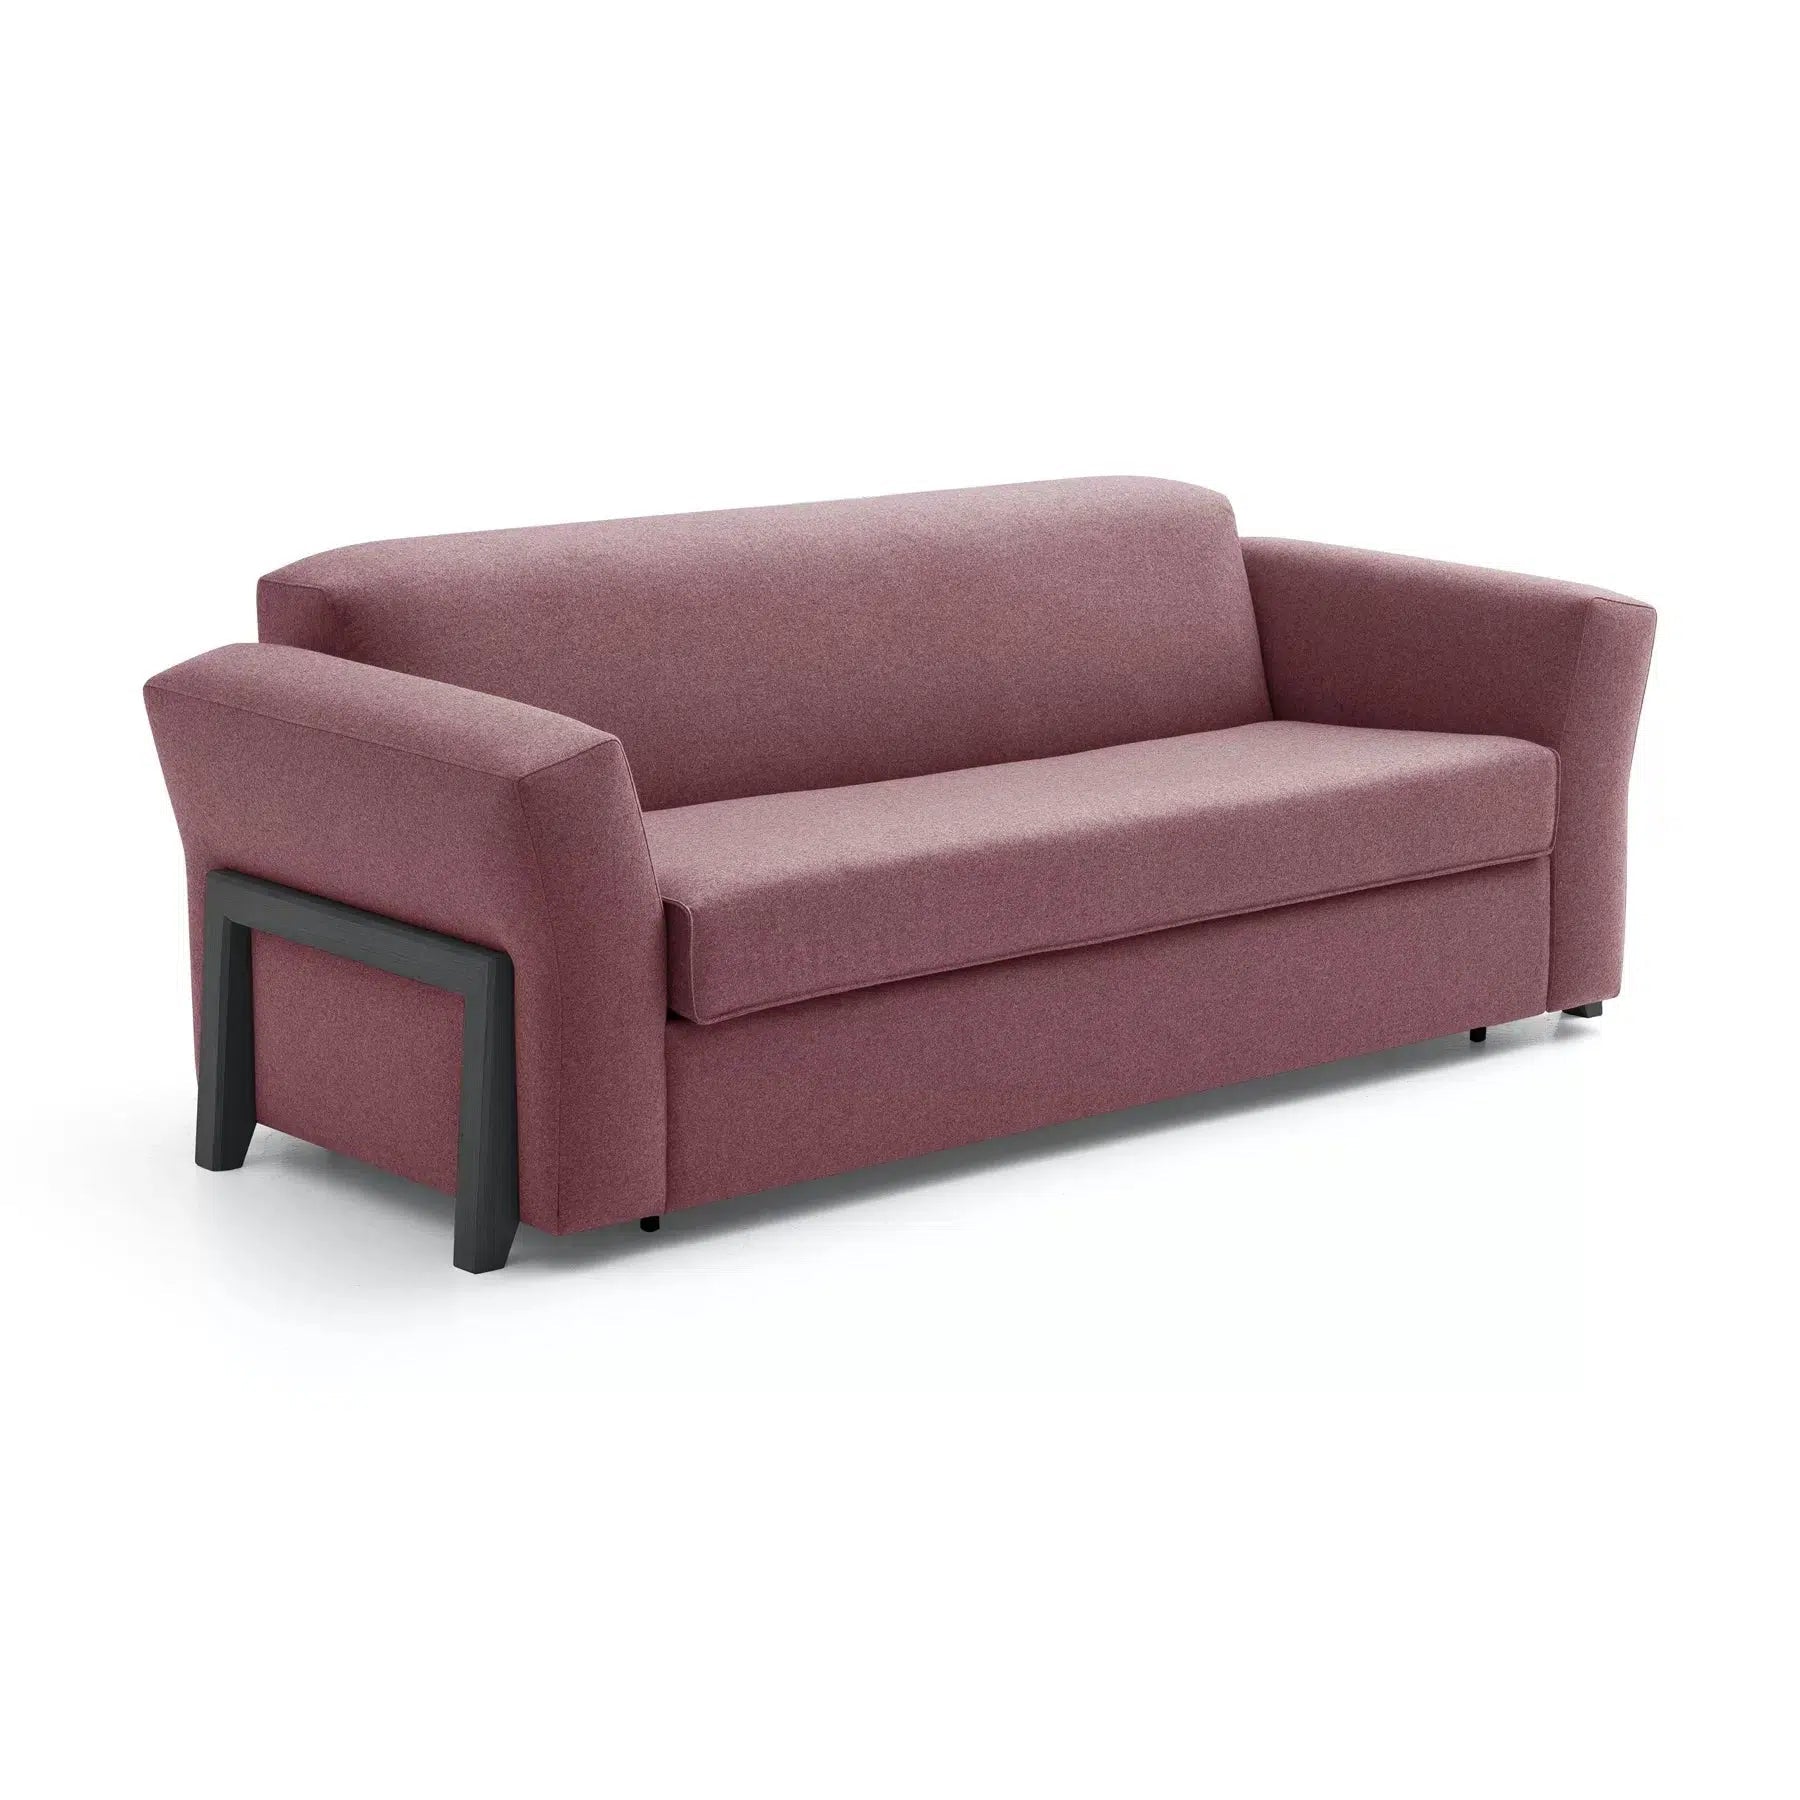 Perseo 941 Sofa Bed-TM Leader-Contract Furniture Store